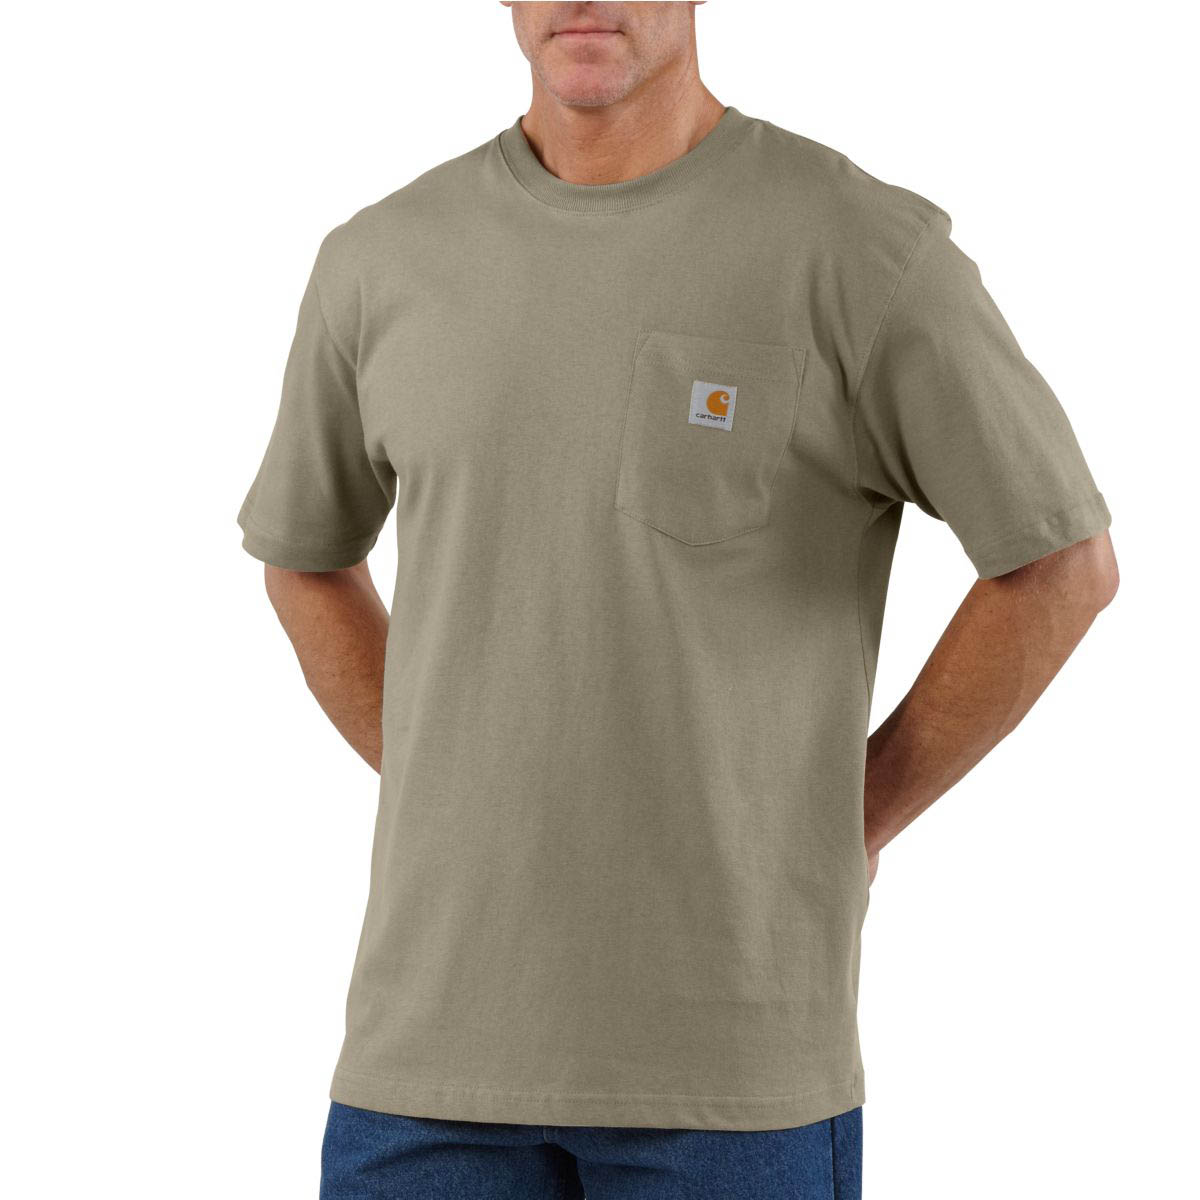 Details about   Carhartt Men's Relaxed Fit Workwear Non-Pocket T-Shirt